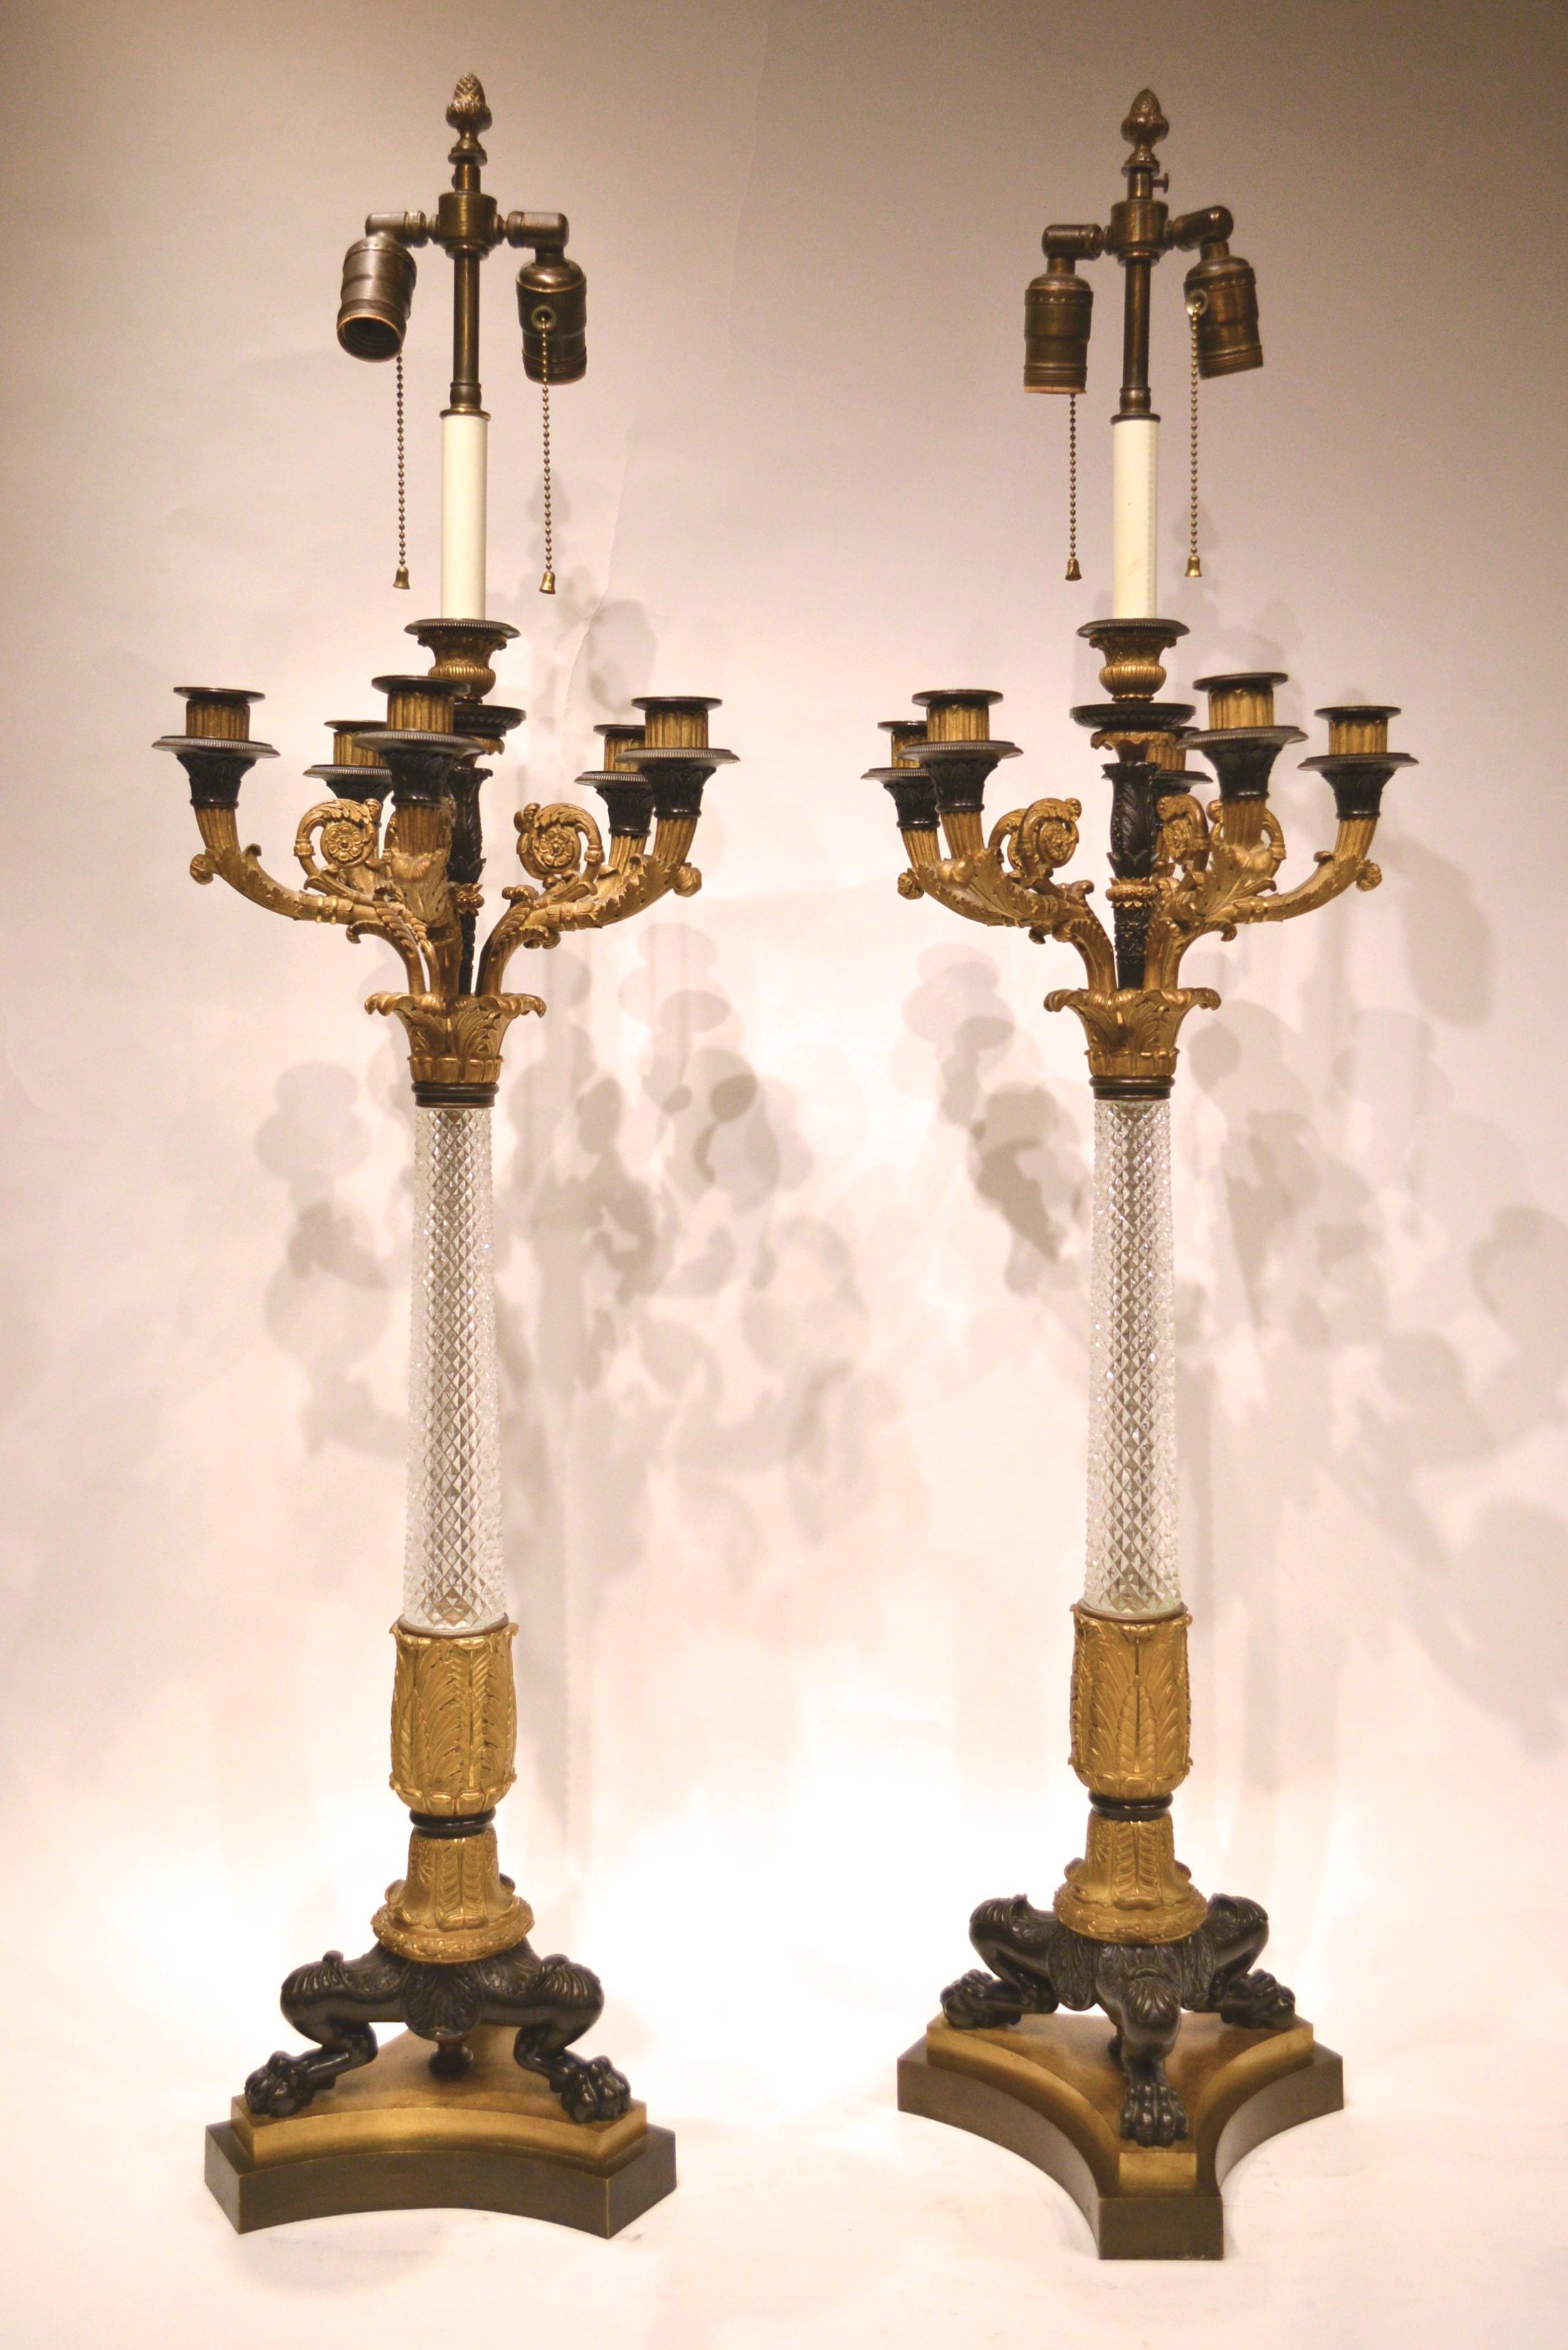 Pair of very large and impressive French 19th century Empire cut glass and two-tone bronze candelabras made to lamps.